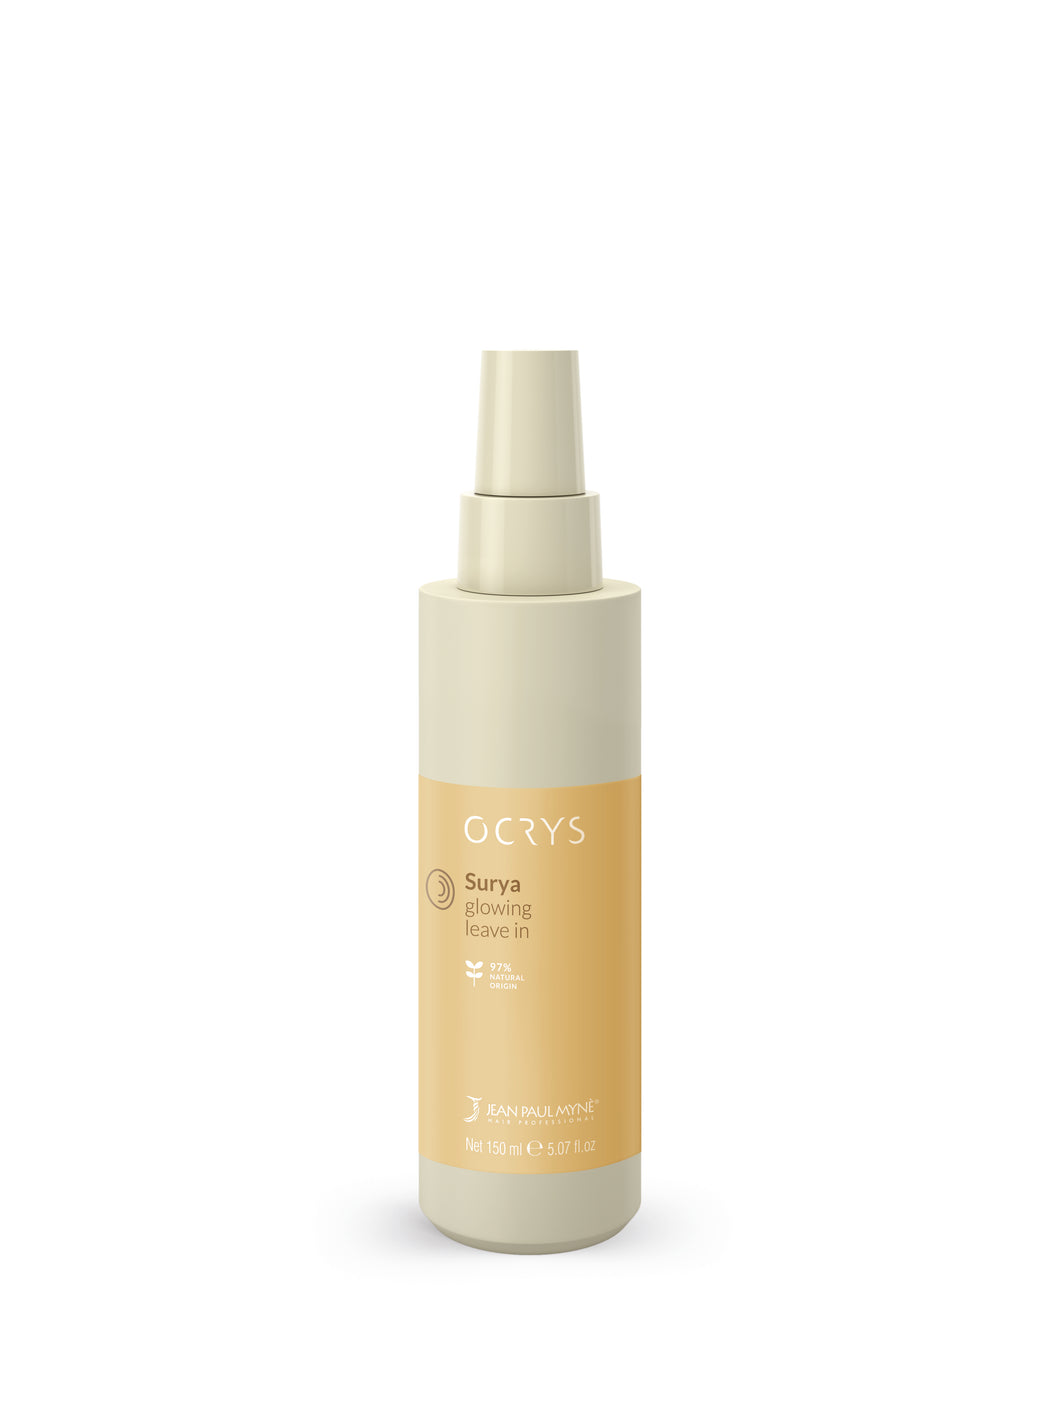 New OCRYS Surya Glowing Leave in -150ml